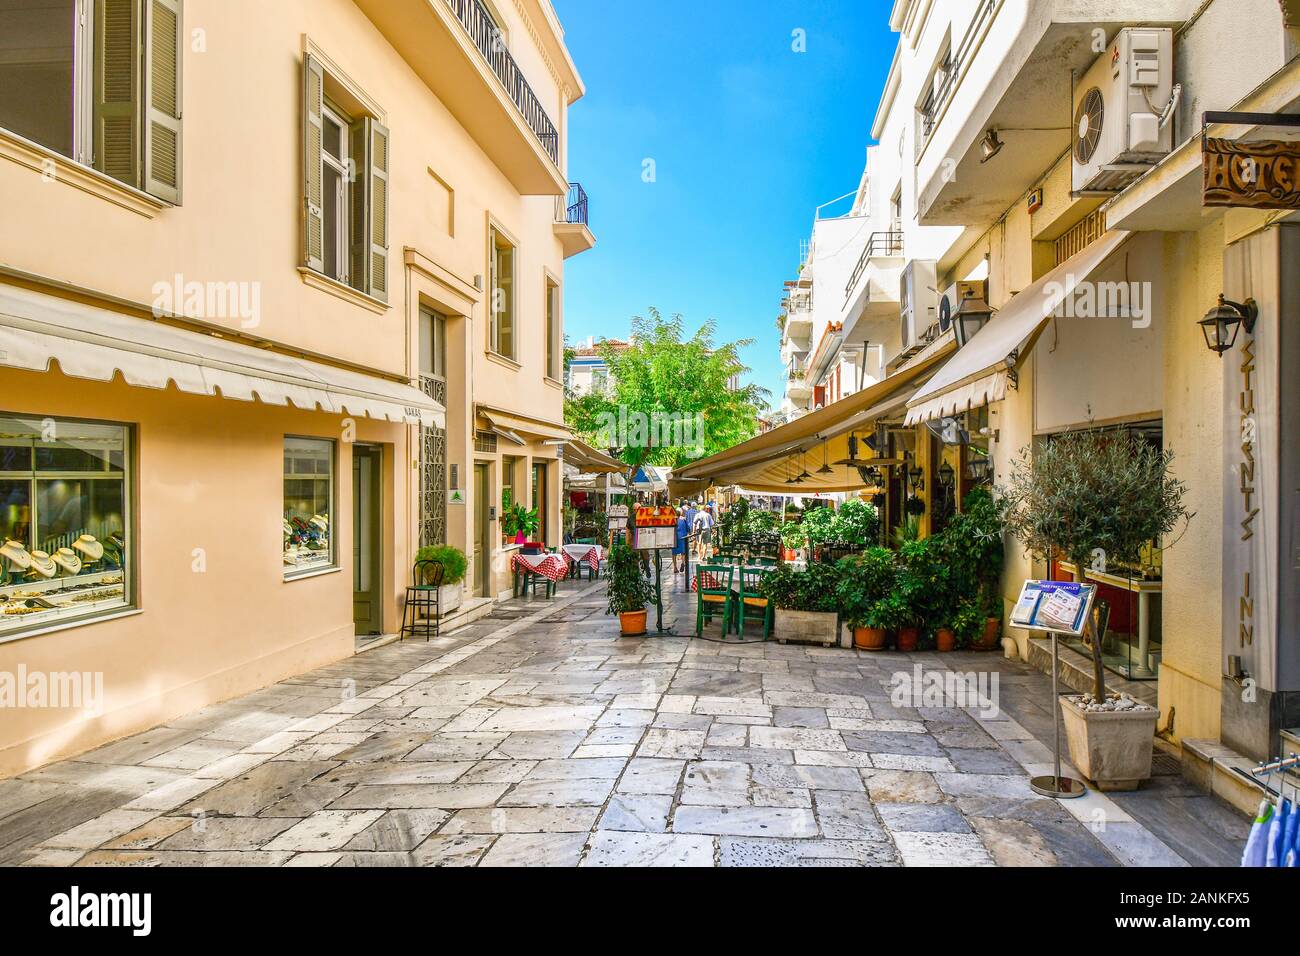 A picturesque sidewalk cafe on a narrow pedestrian street through the tourist district of Plaka in the historic center of Athens, Greece. Stock Photo